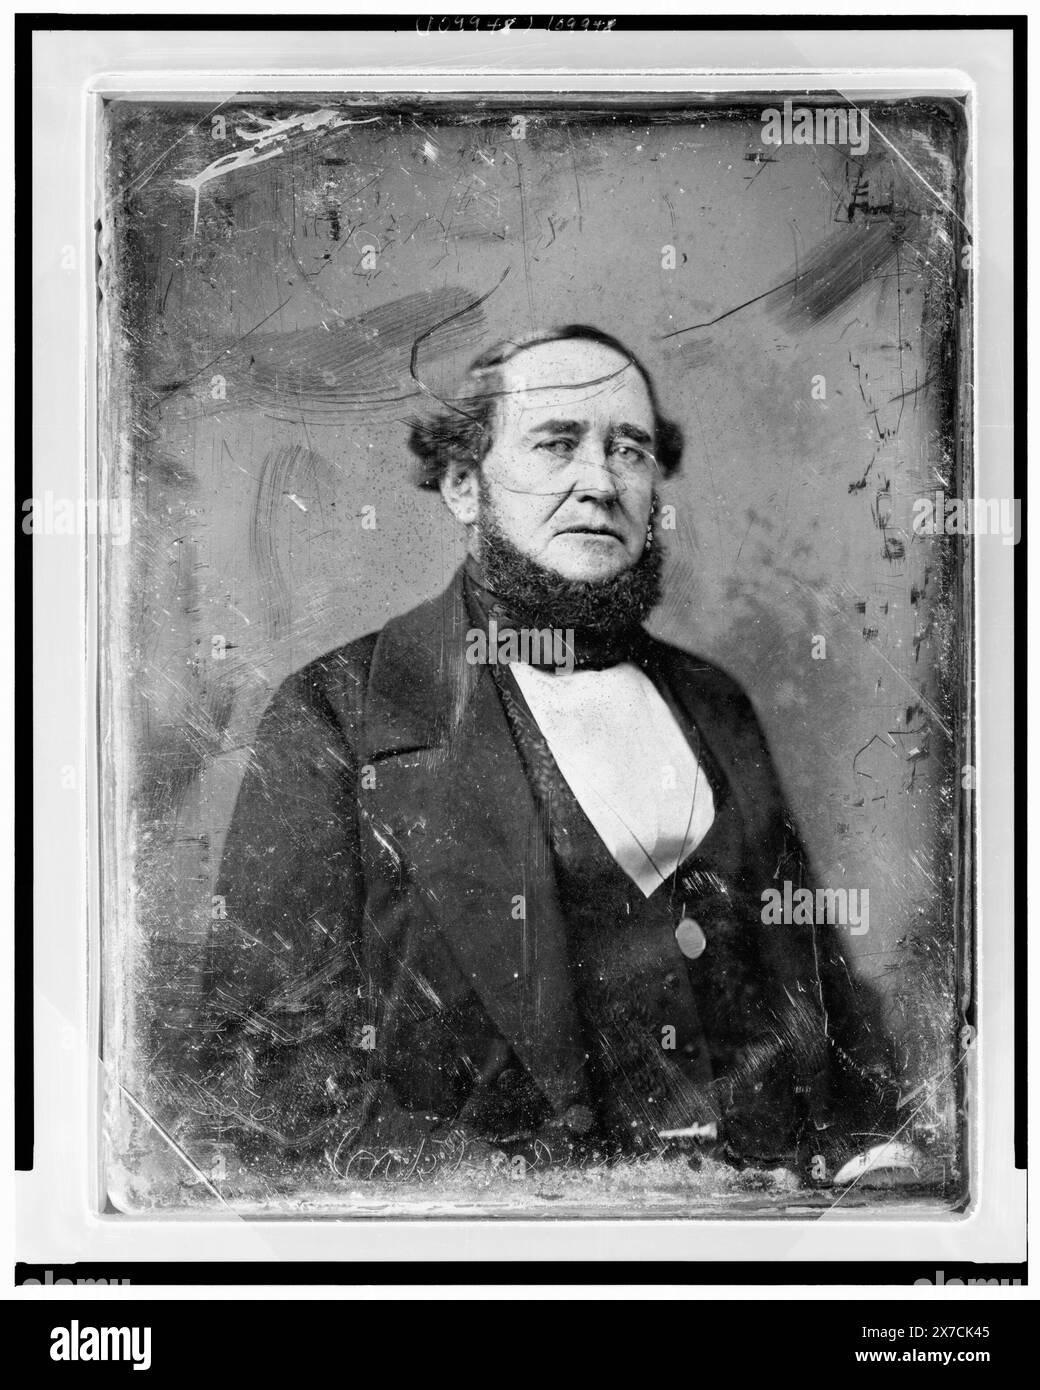 Unidentified man, half-length portrait, three-quarters to right, eyes front, with monocle suspended around neck, Scratched on face of plate: 256; Capt. Dunn. Scratched on back of plate: 127., Alternative identification: Mr. Dunn (Captain Charles Dunn who served in the Black Hawk War and later became Chief Justice of the Wisconsin Territorial Supreme Court)., Transfer; U.S. War College; 1920; (DLC/PP-1920:46153)., Forms part of: Daguerreotype collection ,  Produced by Mathew Brady's studio. Stock Photo